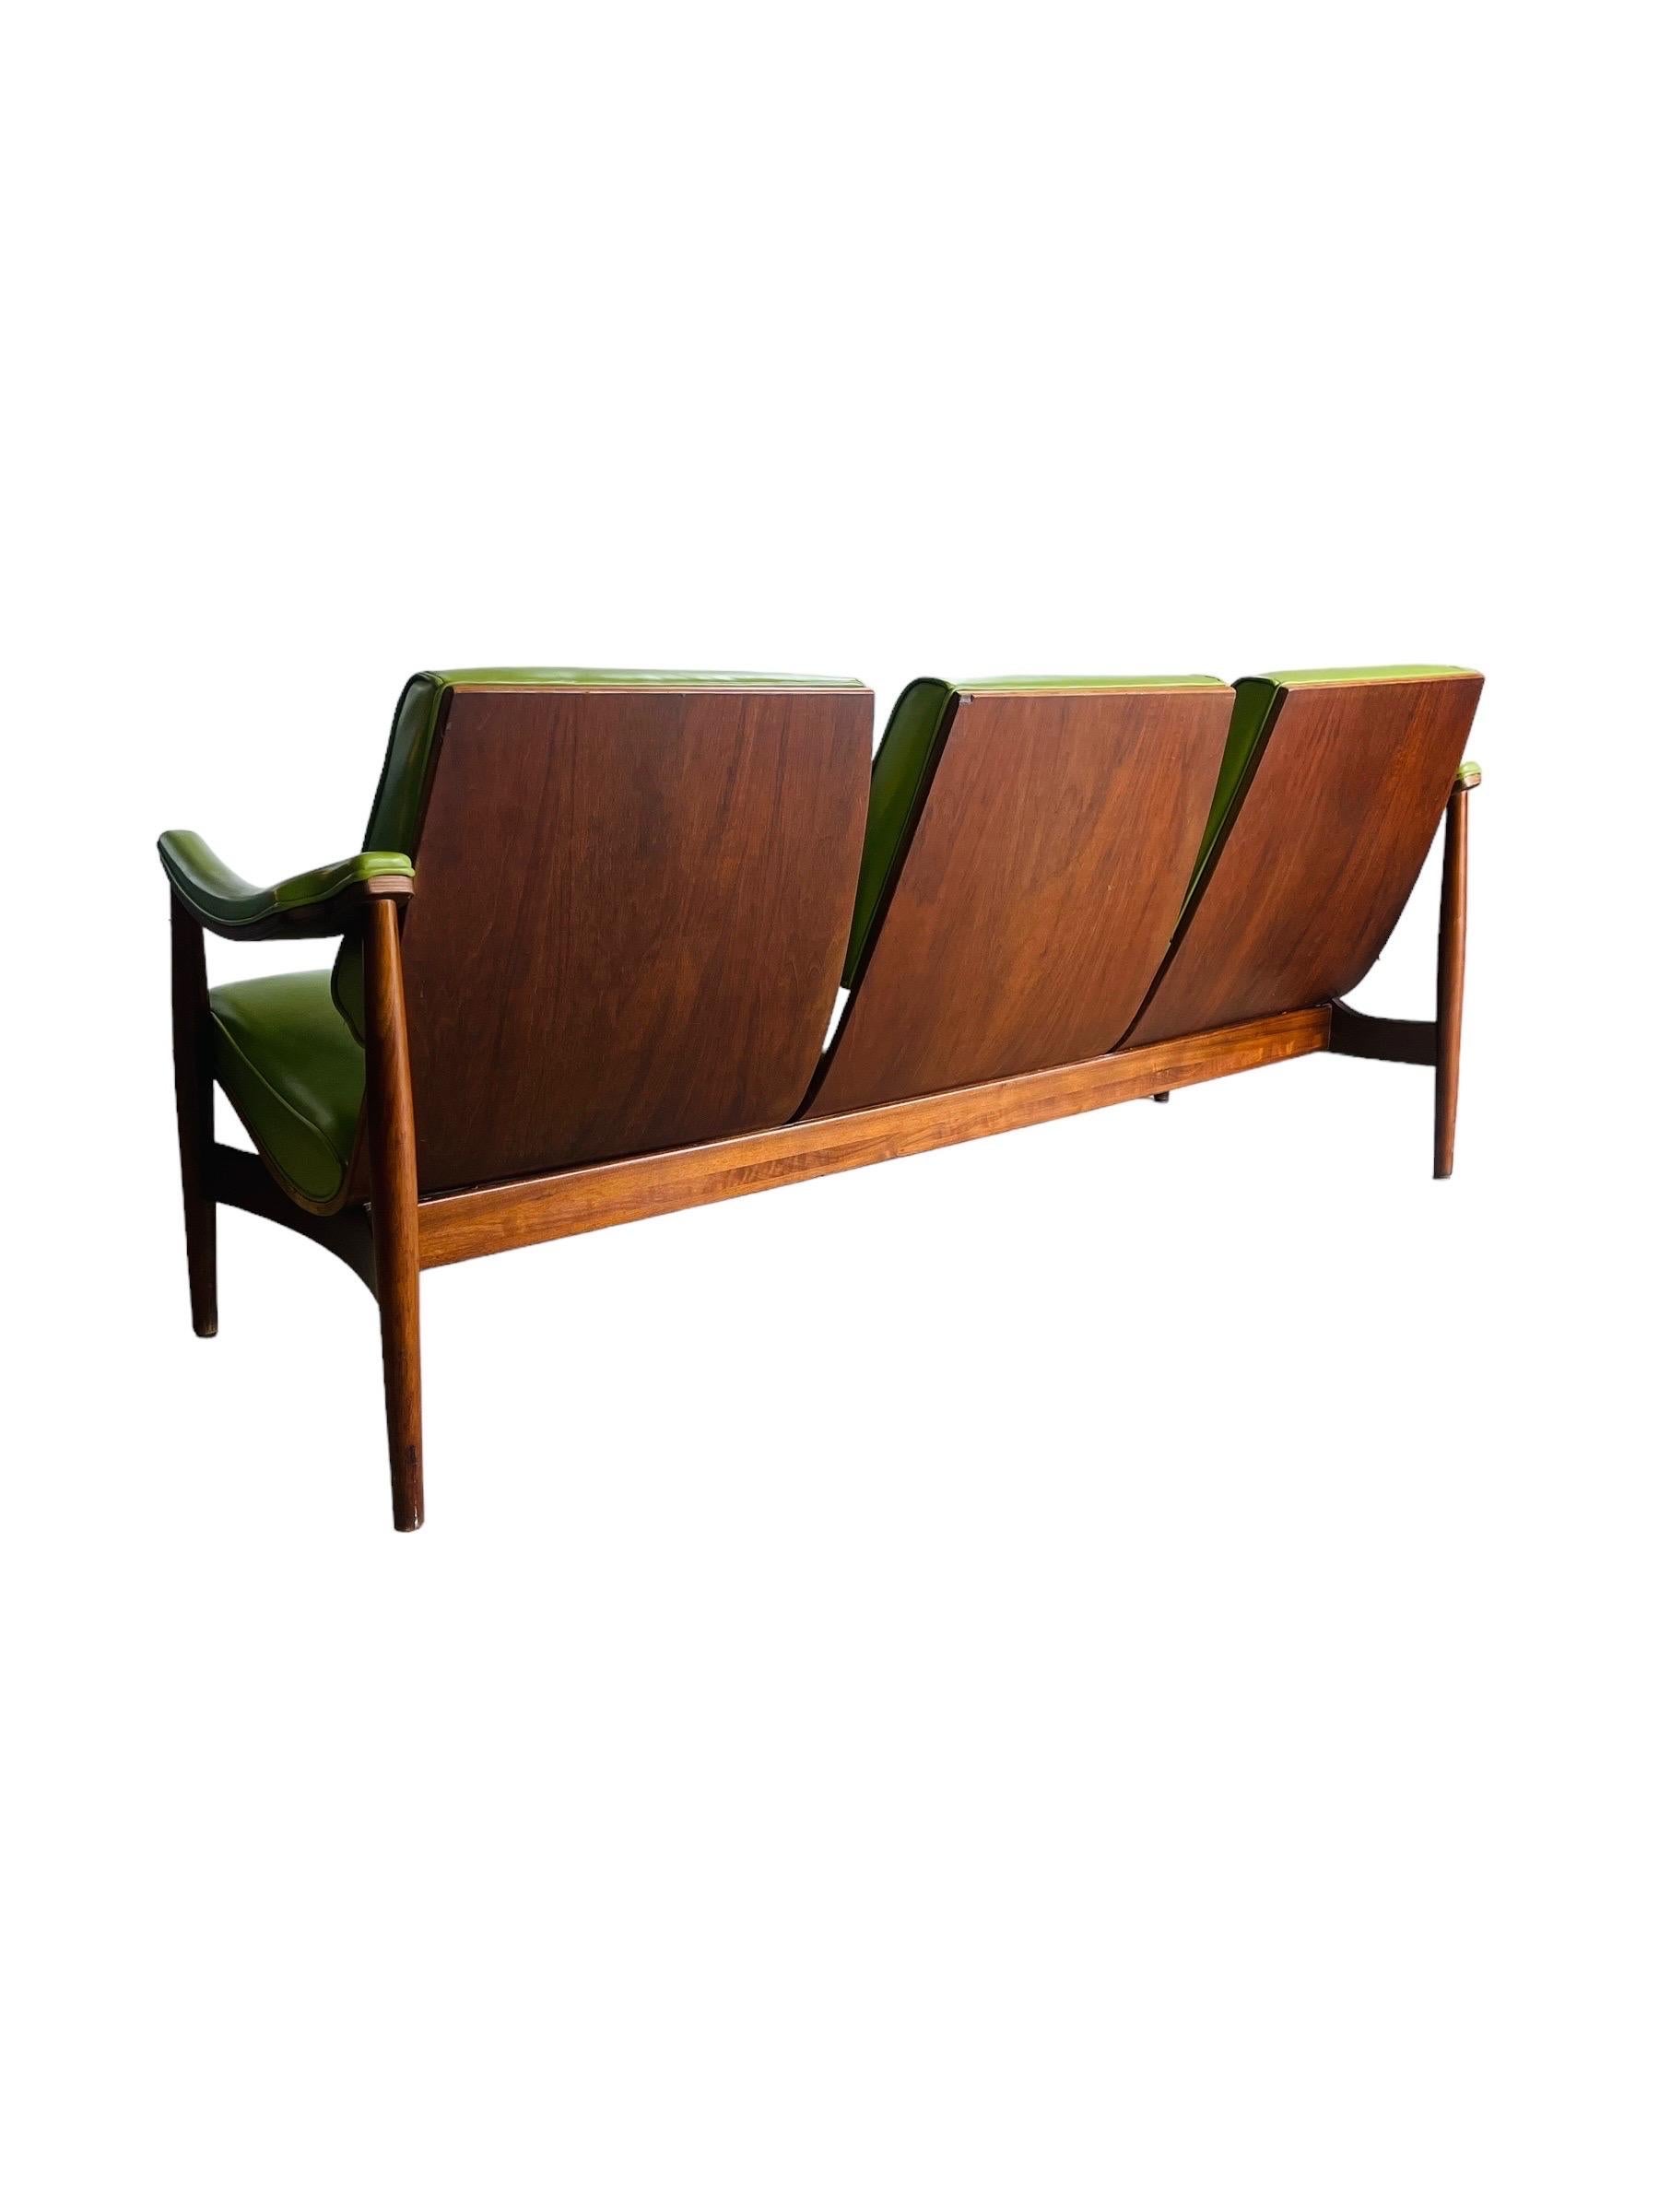 Immerse yourself in the vintage charm of this Mid-Century Modern Thonet sofa. Crafted with exquisite walnut bentwood, this sofa retains its original tag, indicating its authentic pedigree. While it shows minor stains on the right seat—a detailed